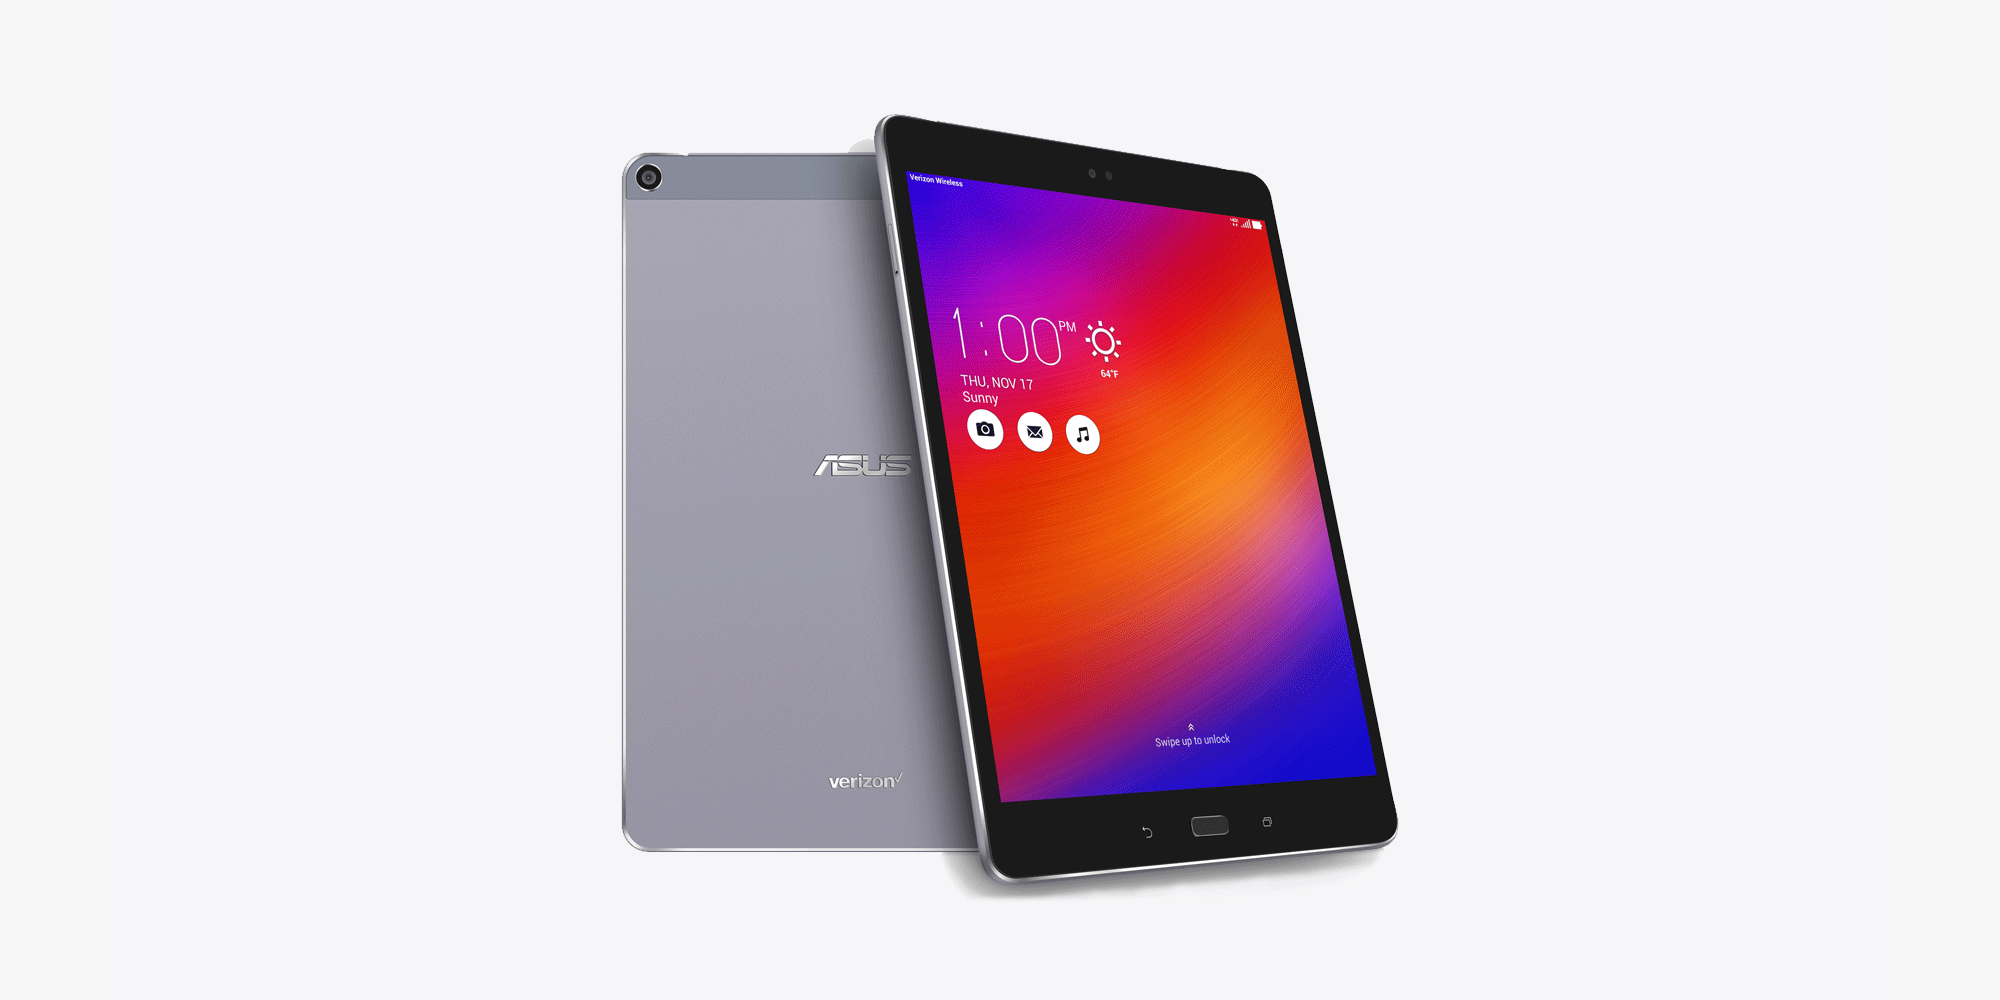 The ASUS ZenPad Z10 tablet: exclusively on Verizon and powered by